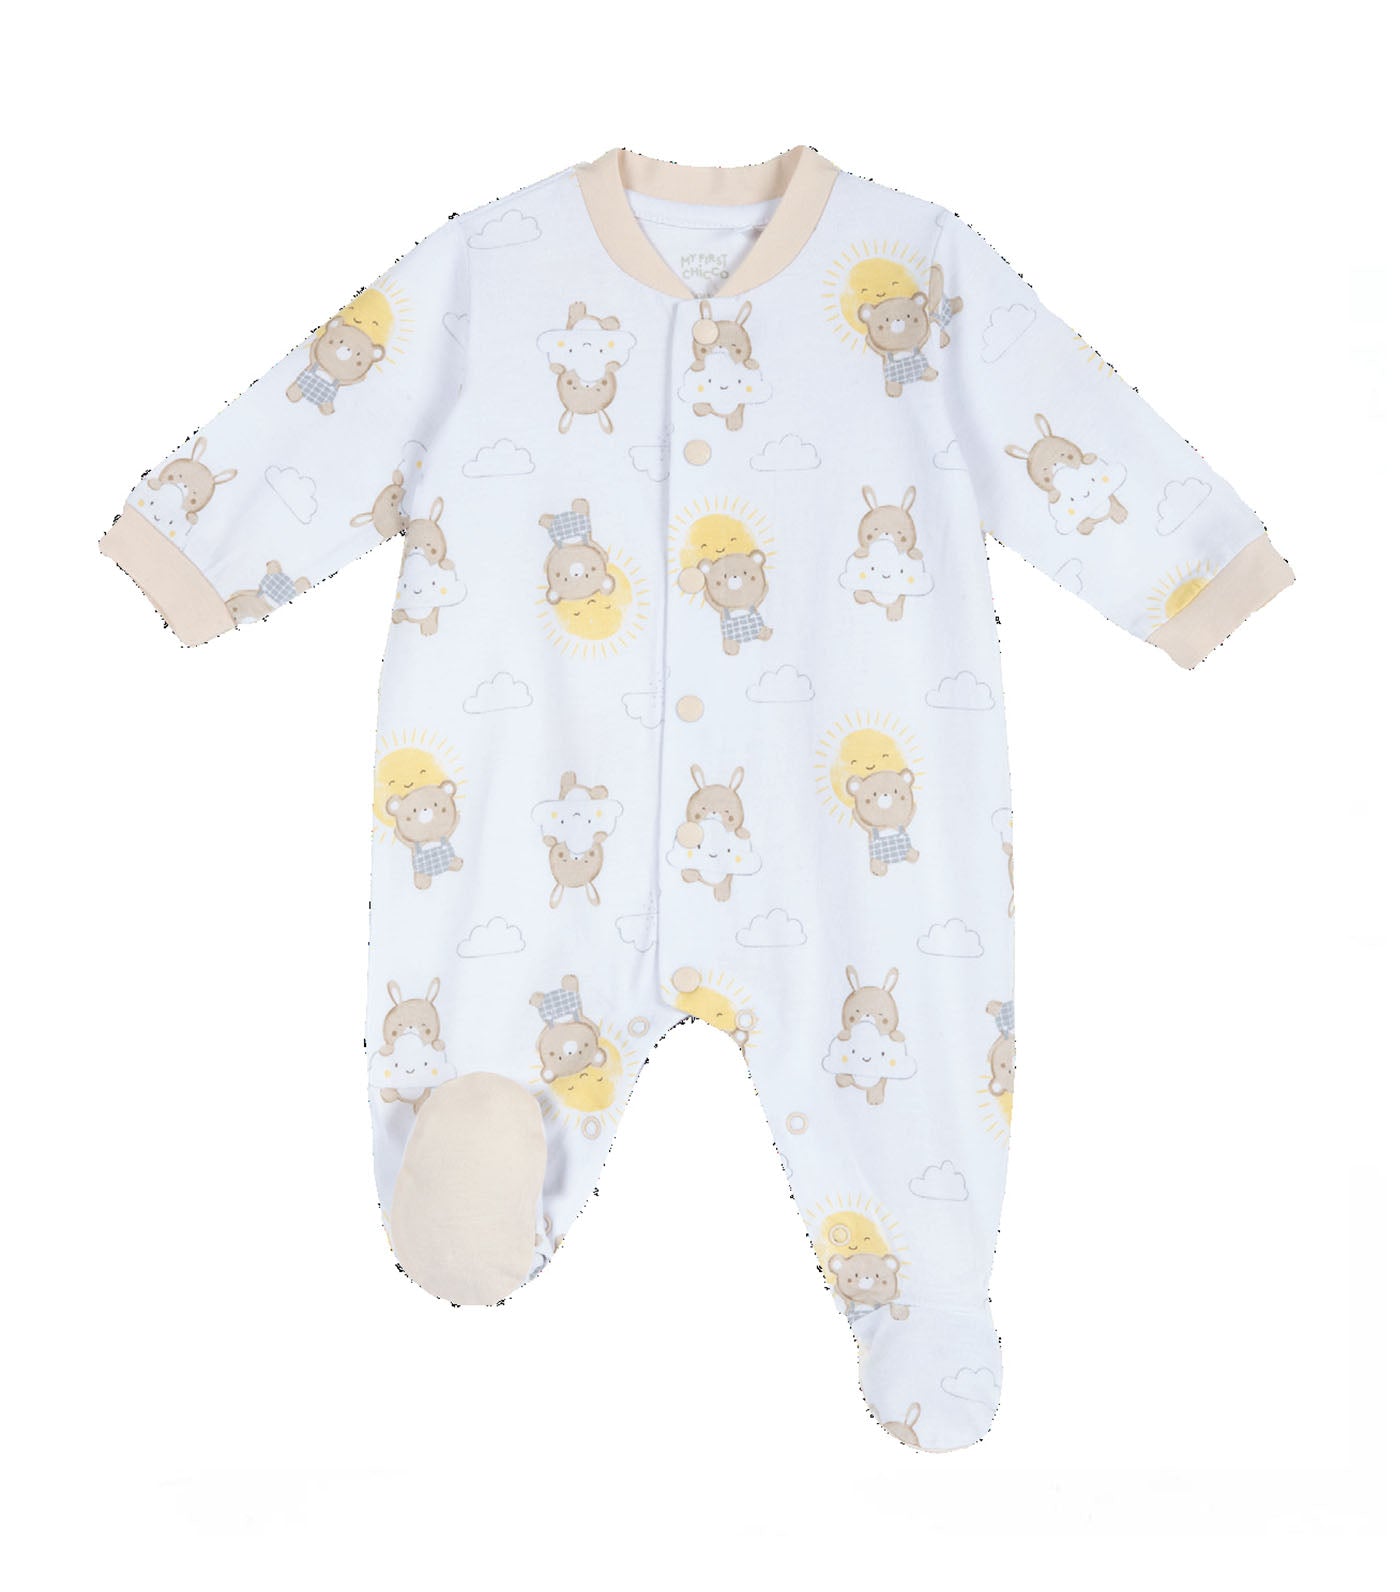 Babysuit with All-Over Pattern - White